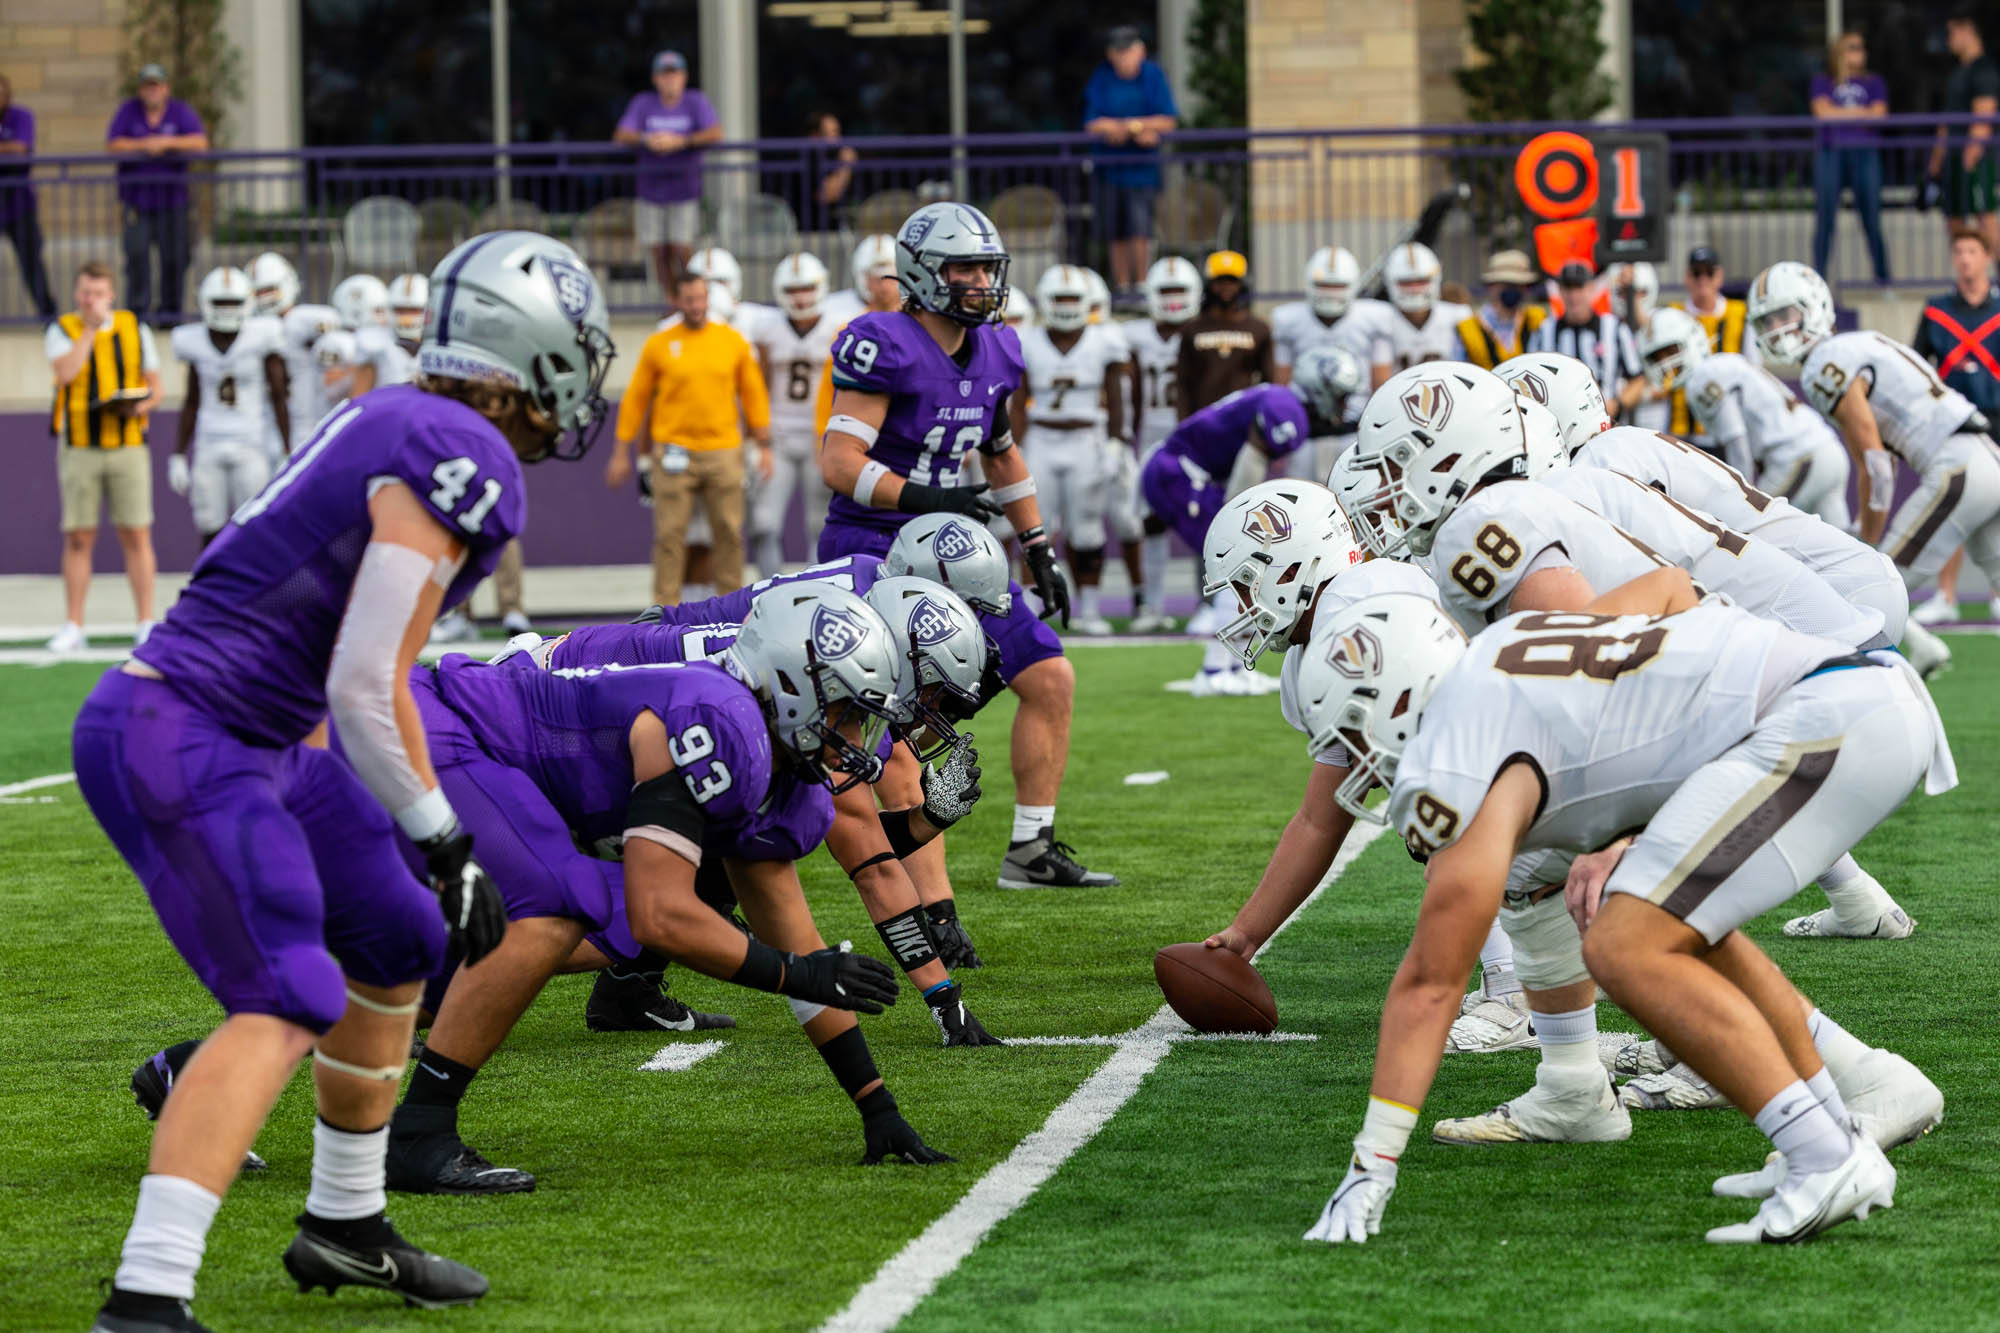 The Tommies line up during the Homecoming football game against Valparaiso University. Mark Brown/University of St. Thomas